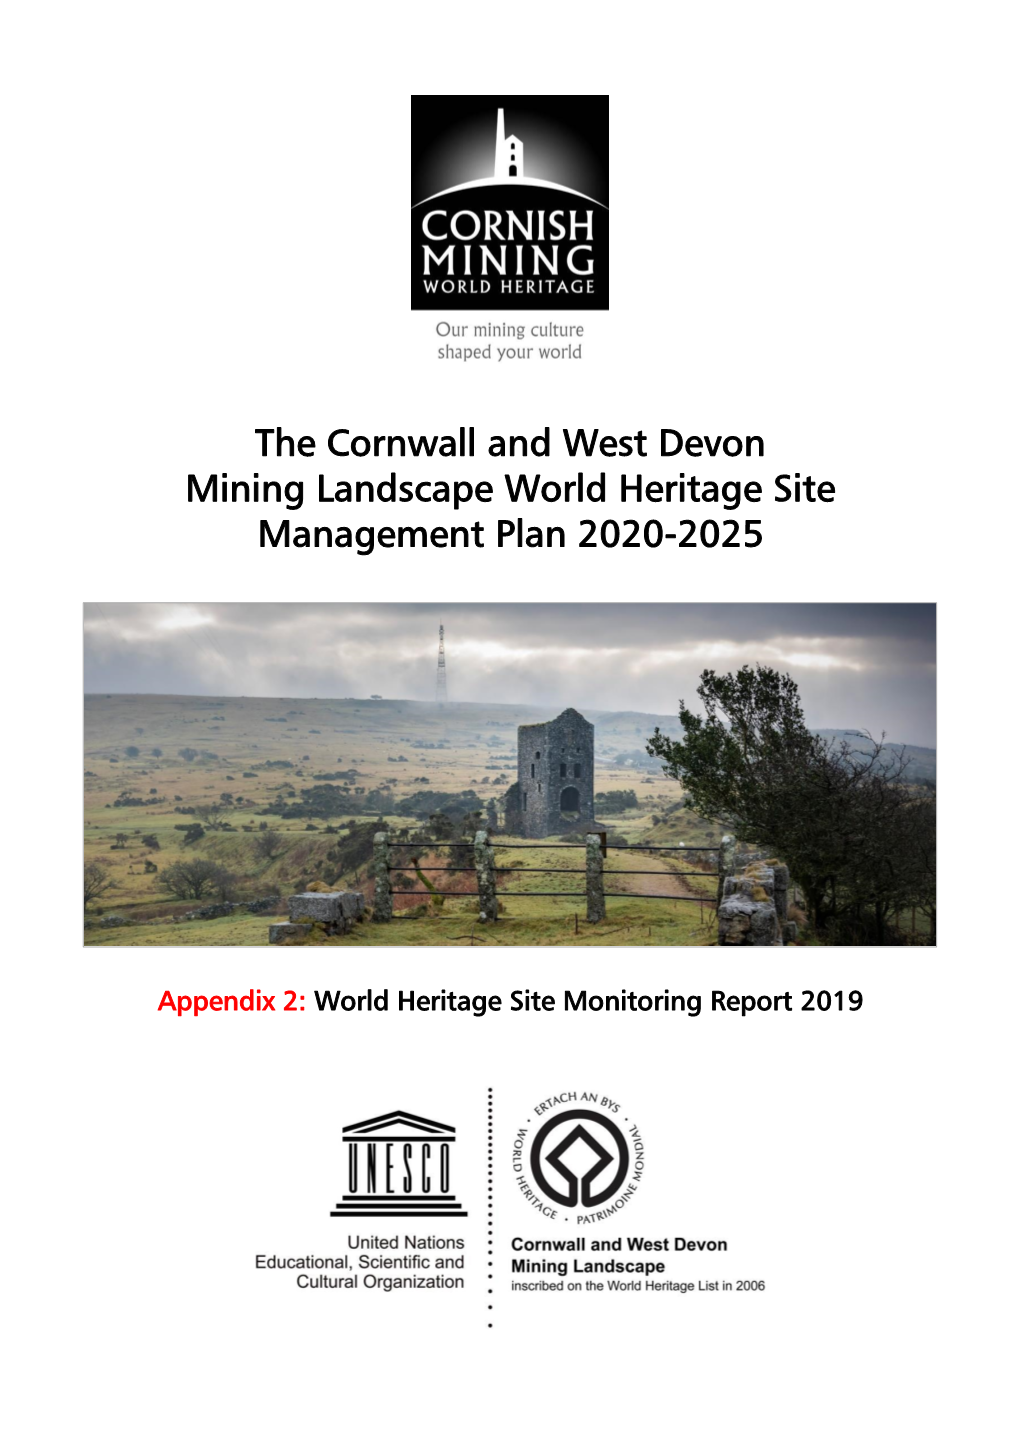 World Heritage Site Monitoring Report 2019